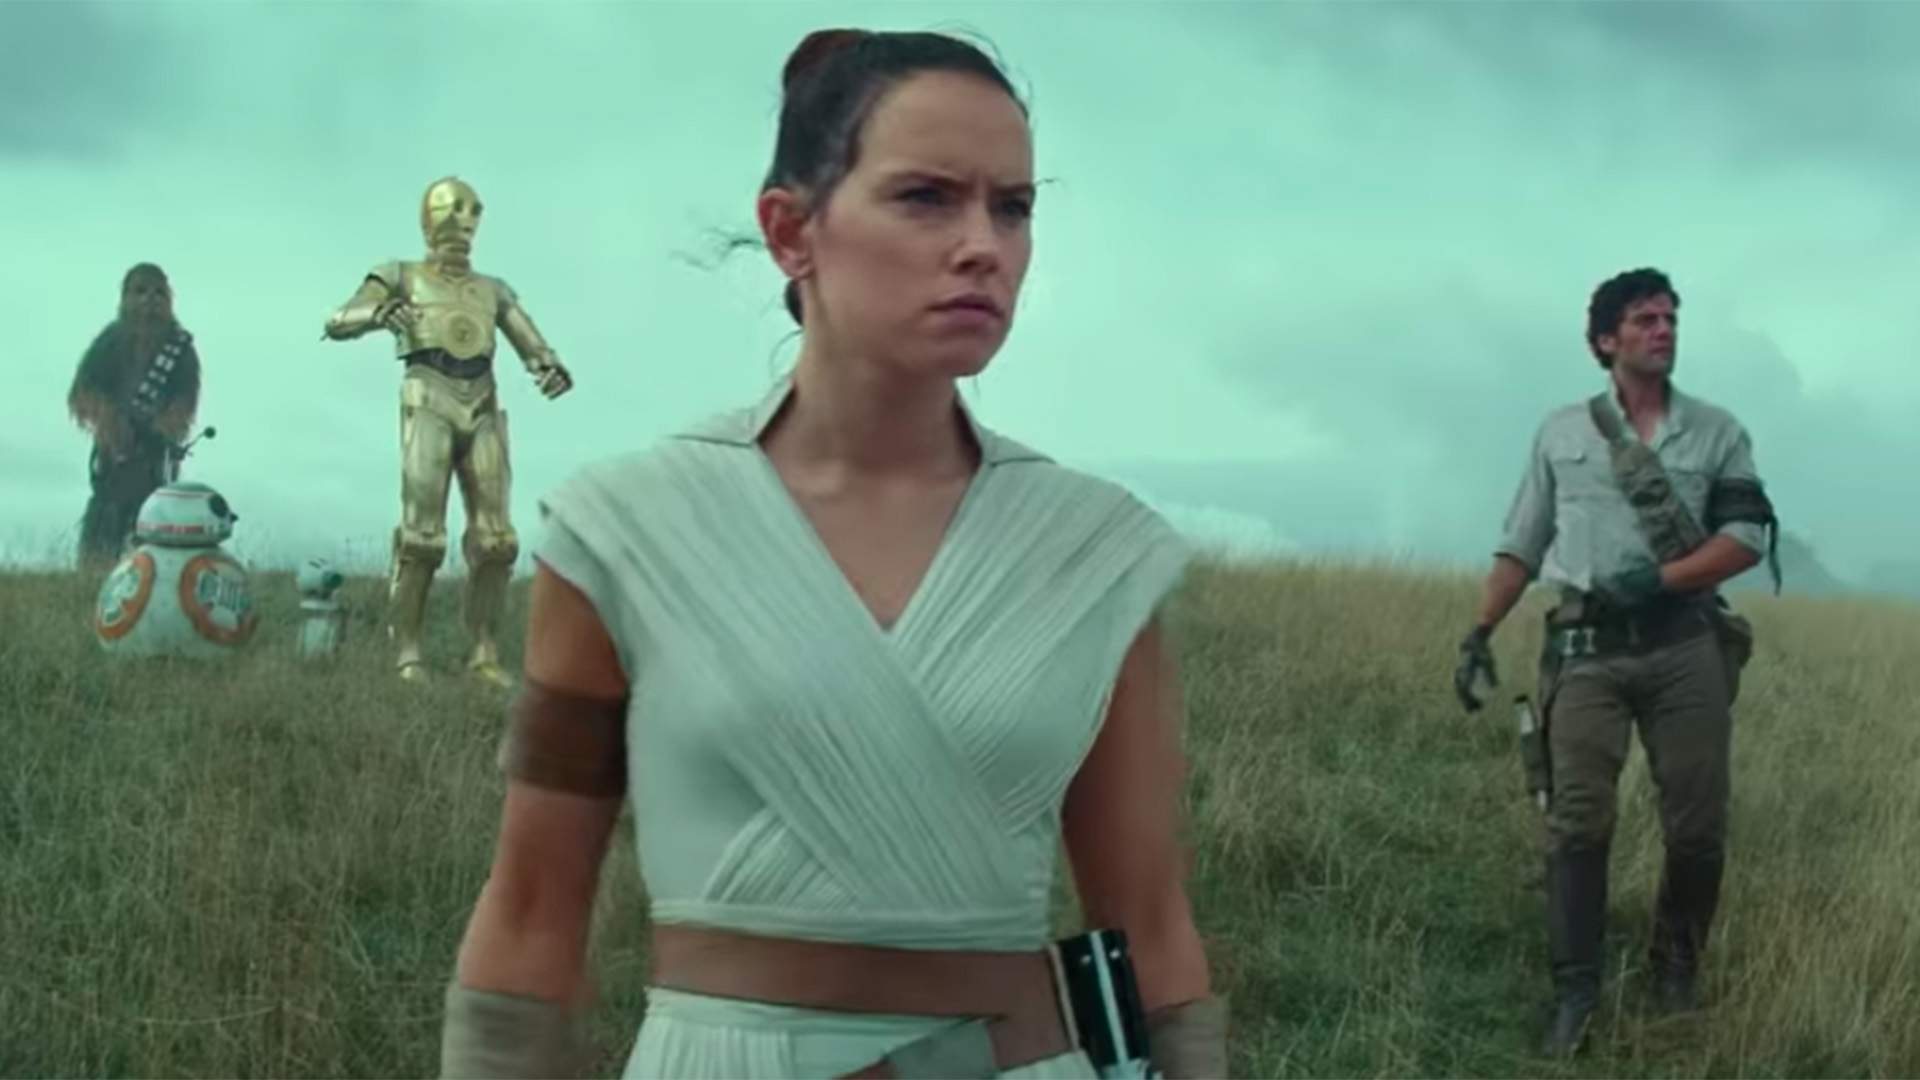 The Long-Awaited First Trailer for 'Star Wars: Episode IX — The Rise of Skywalker' Is Here